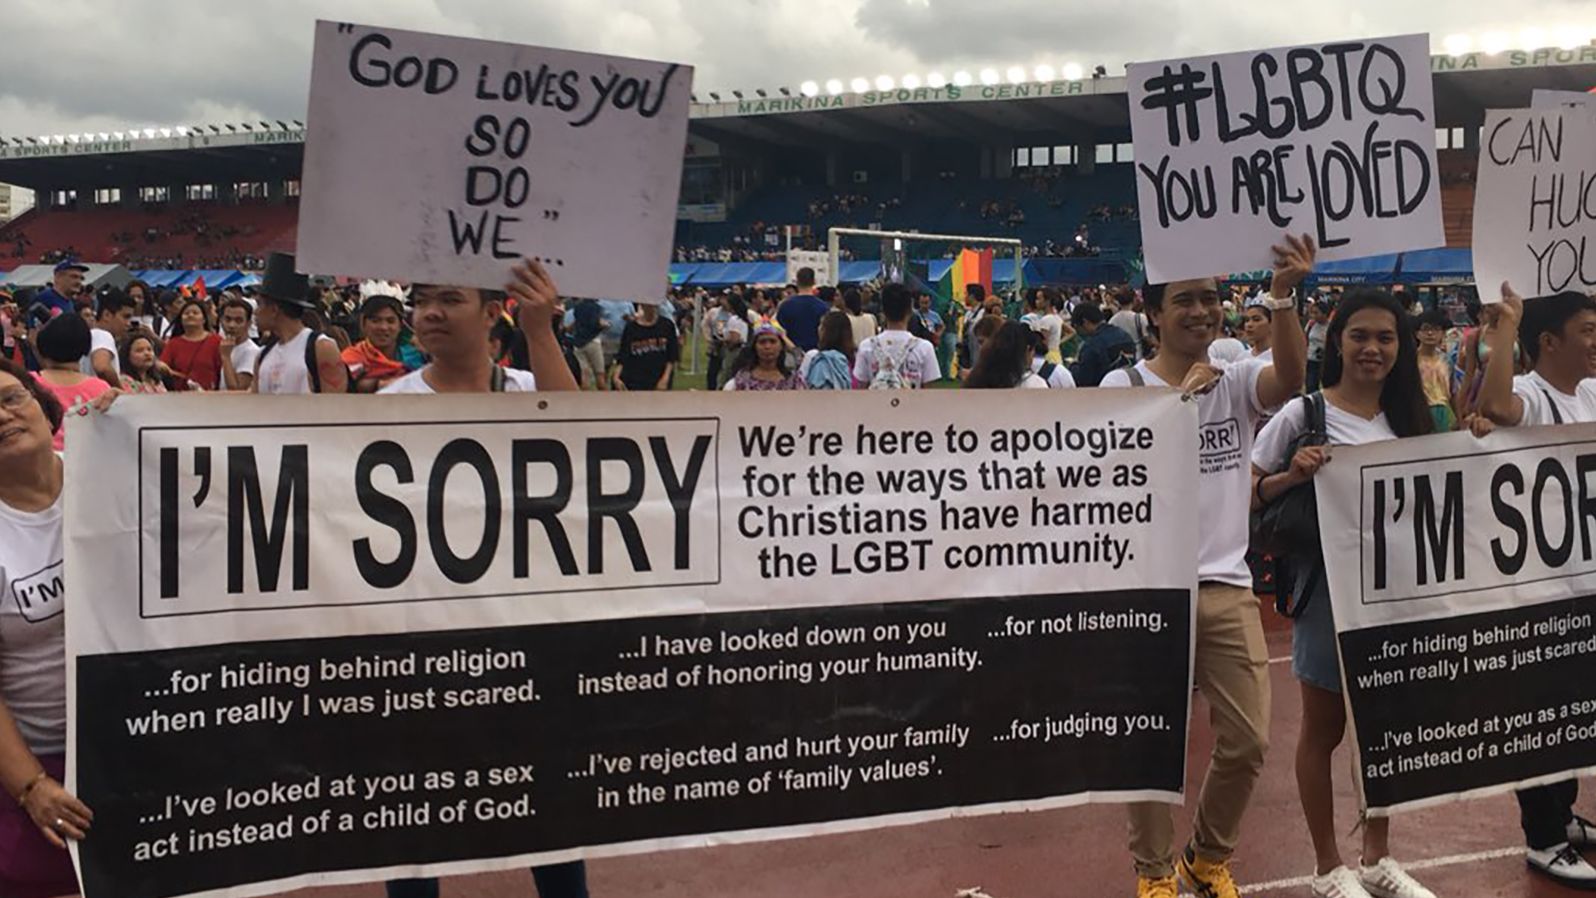 Members of the Church of Freedom in Christ Ministries apologize for Christians at a gay pride parade in the Phillipines.